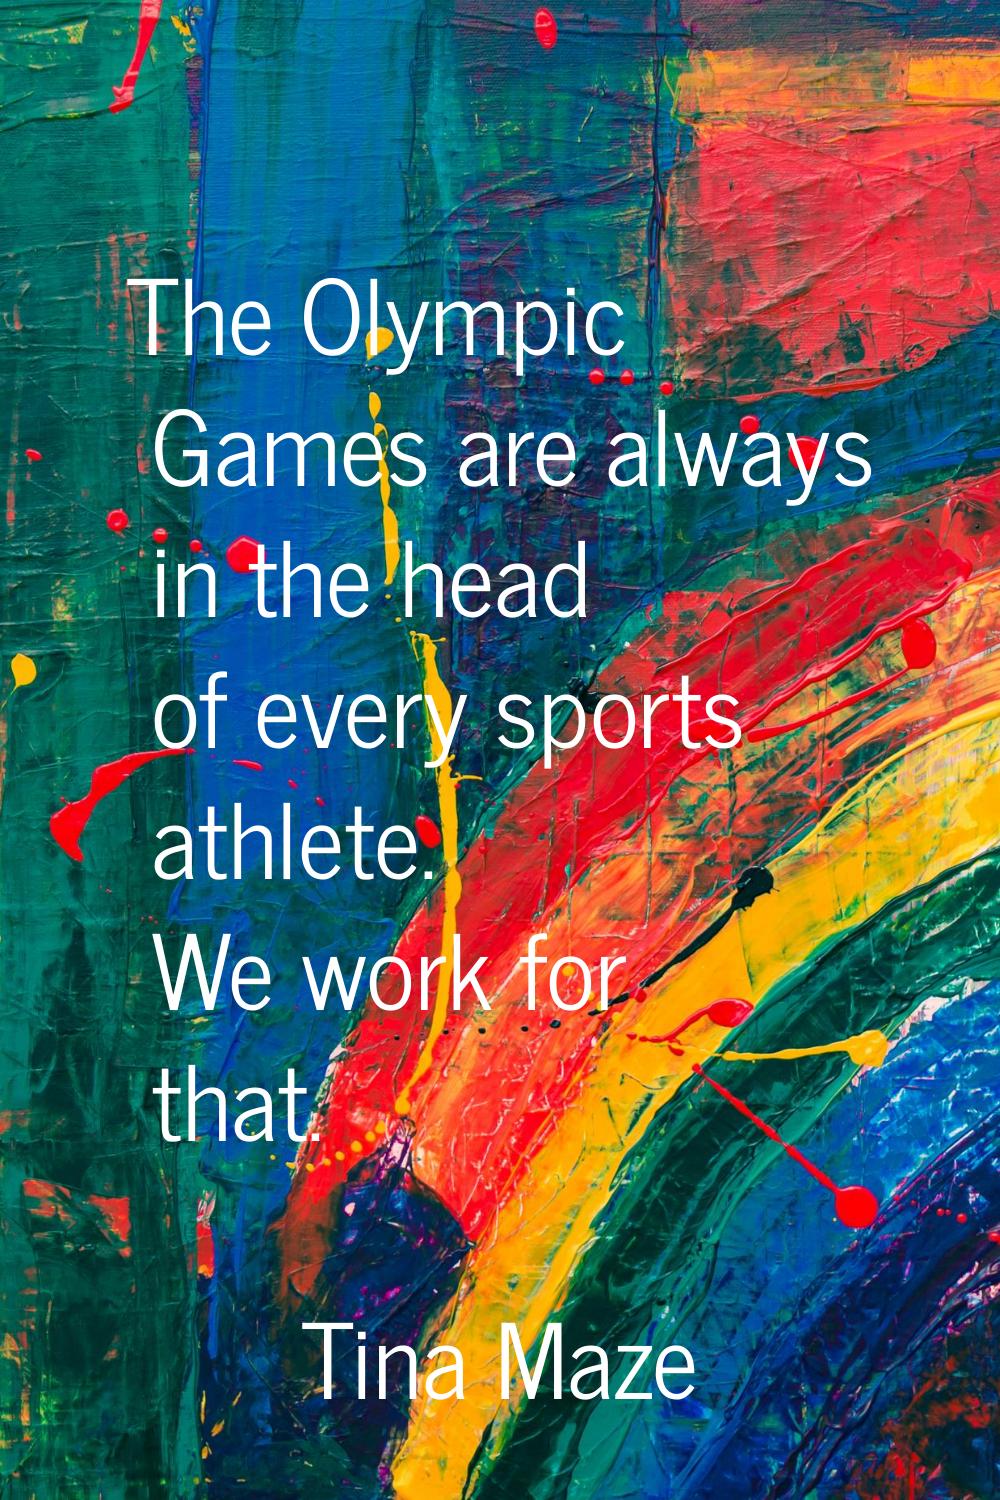 The Olympic Games are always in the head of every sports athlete. We work for that.